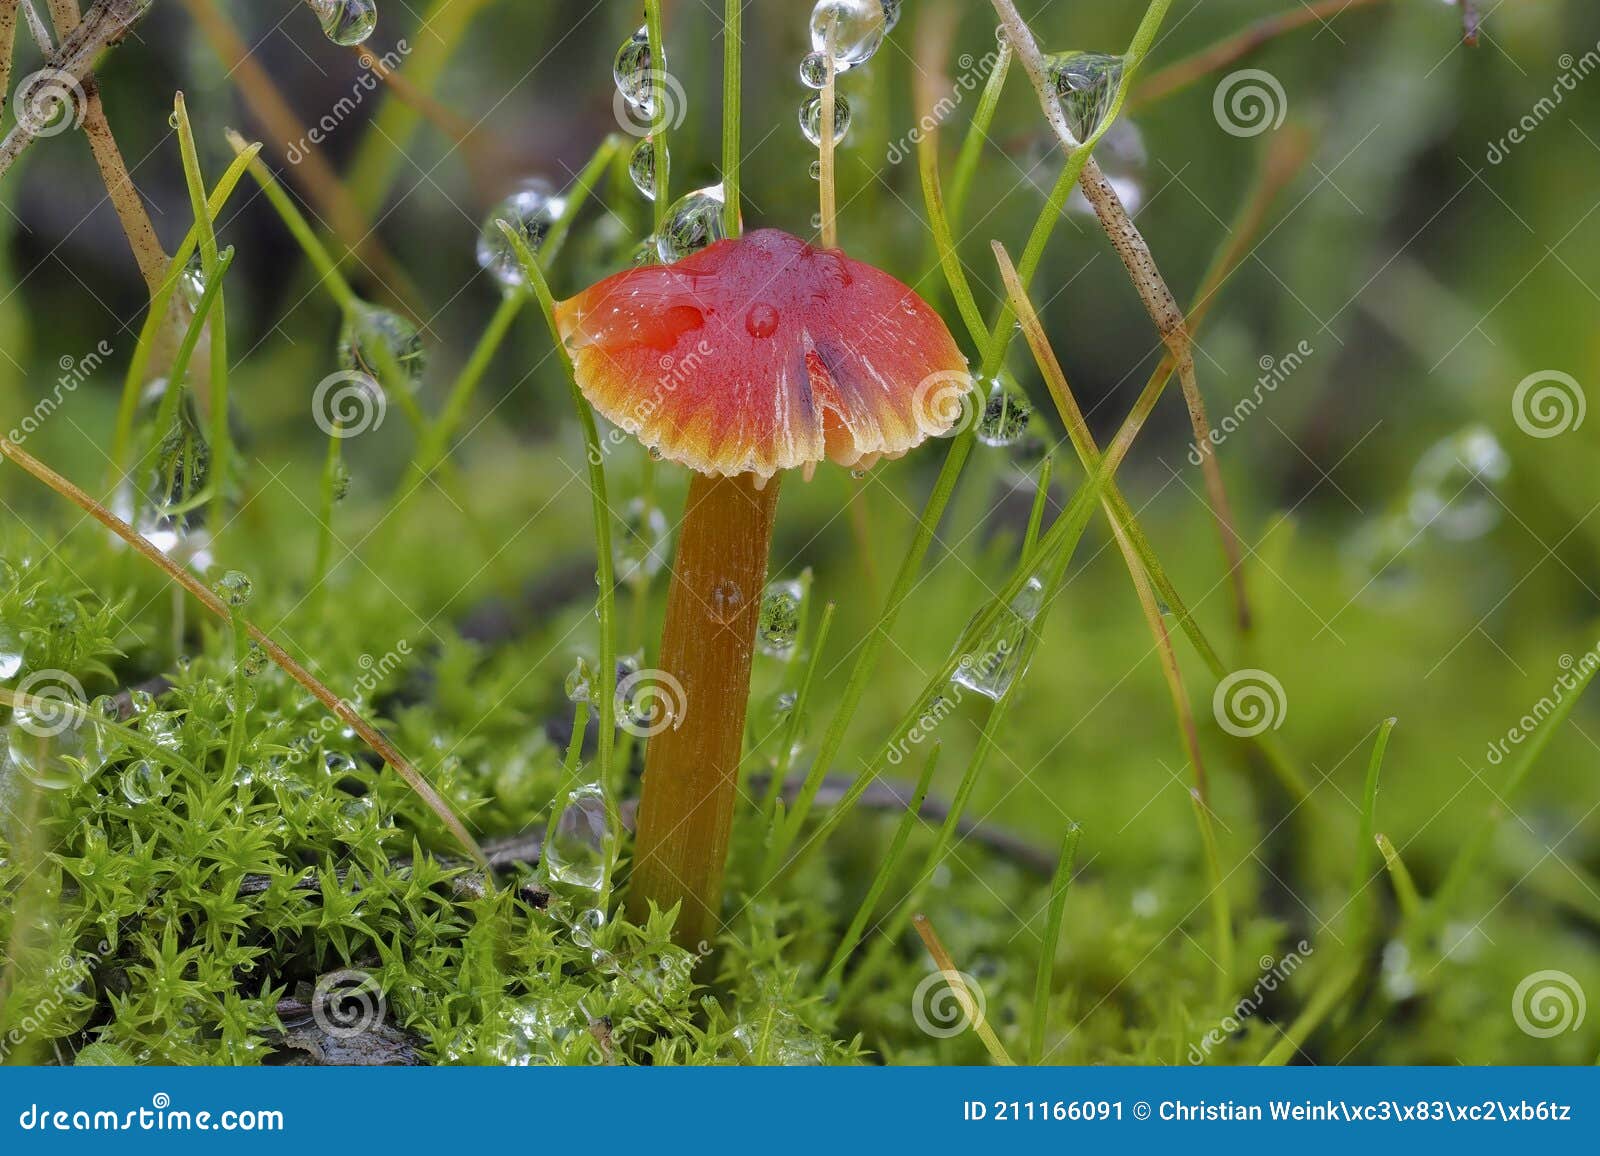 the blackening waxcap hygrocybe conica is an inedible mushroom